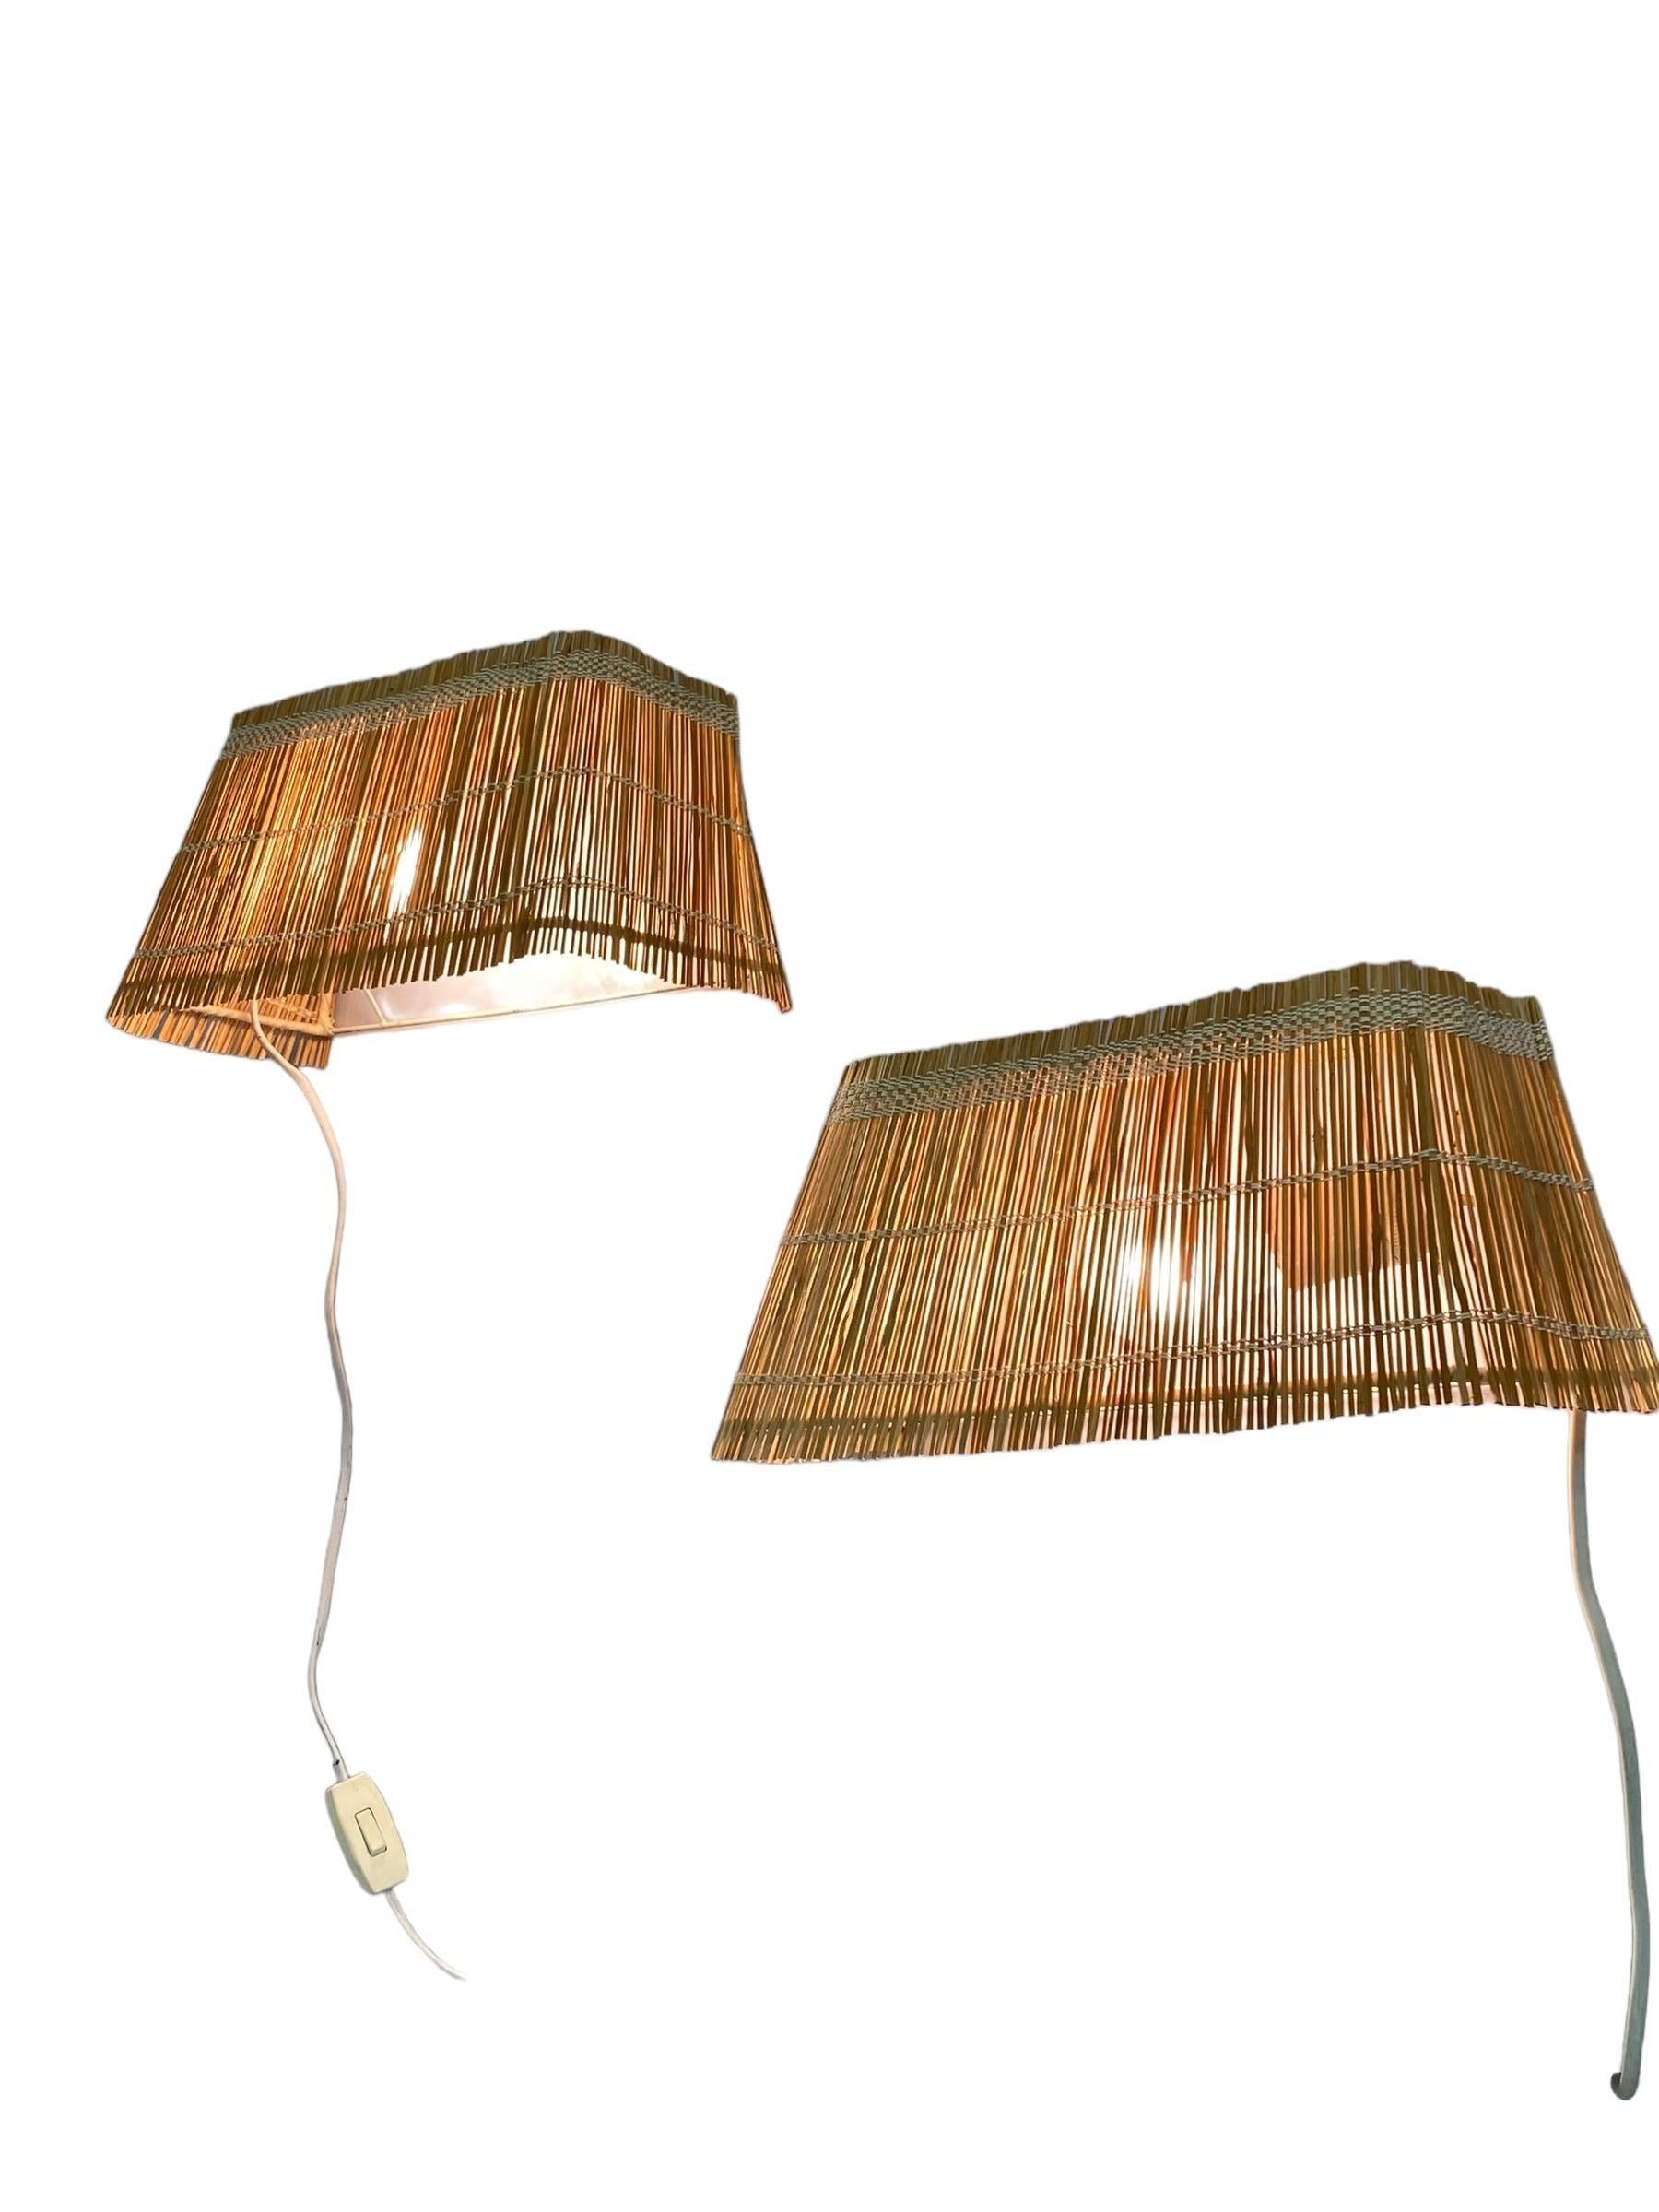 A Pair of Mid-Century Wall Lamps, Finland For Sale 2